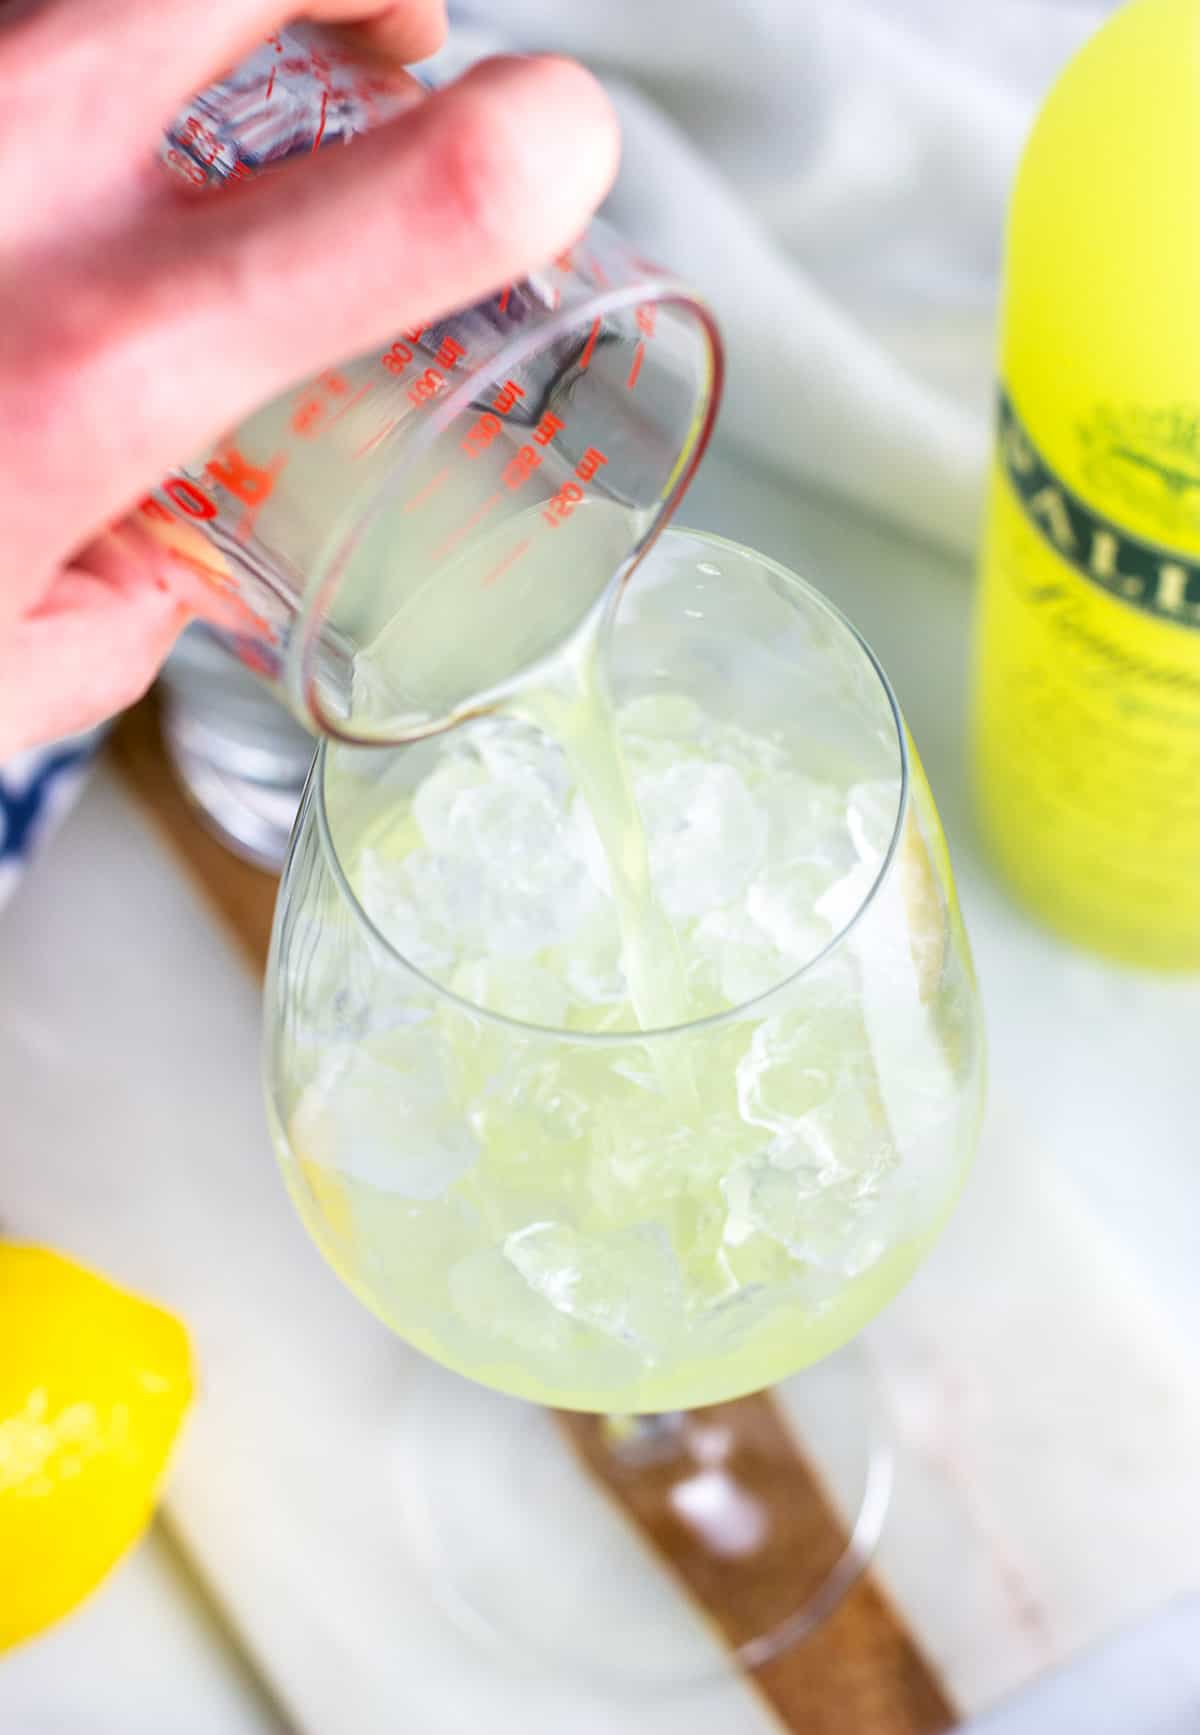 Limoncello being poured into a stemmed wine glass half filled with ice.